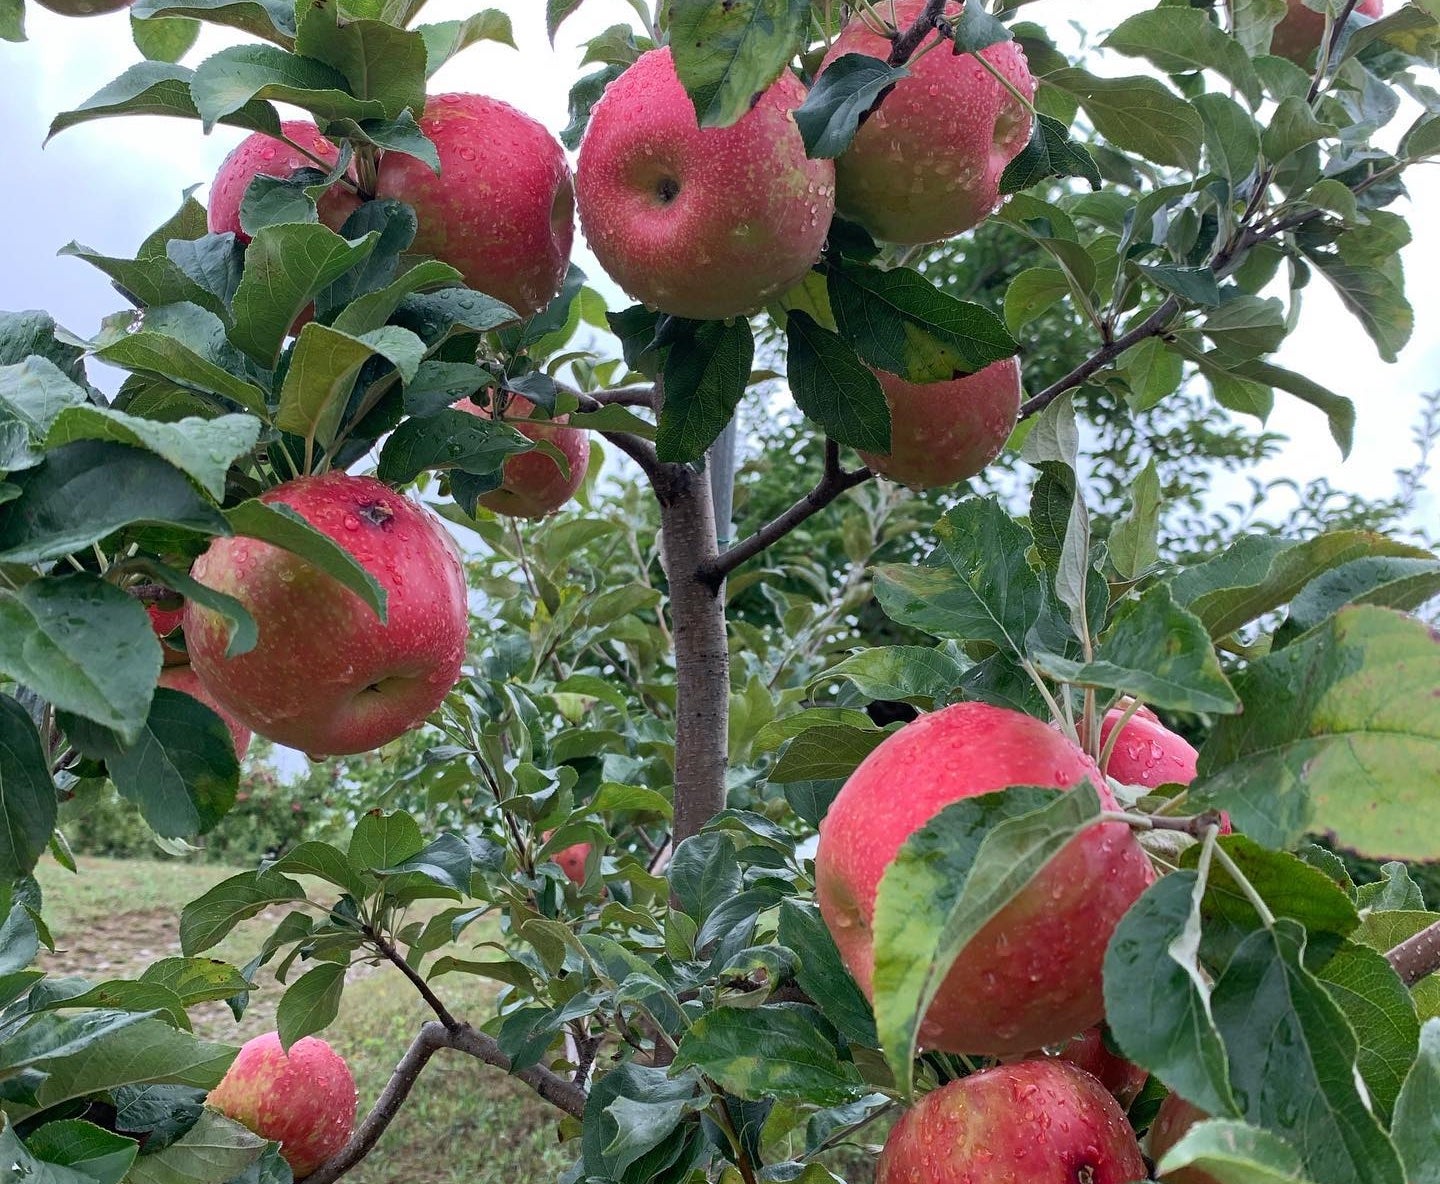 Where to go apple picking in Massachusetts The ultimate guide United